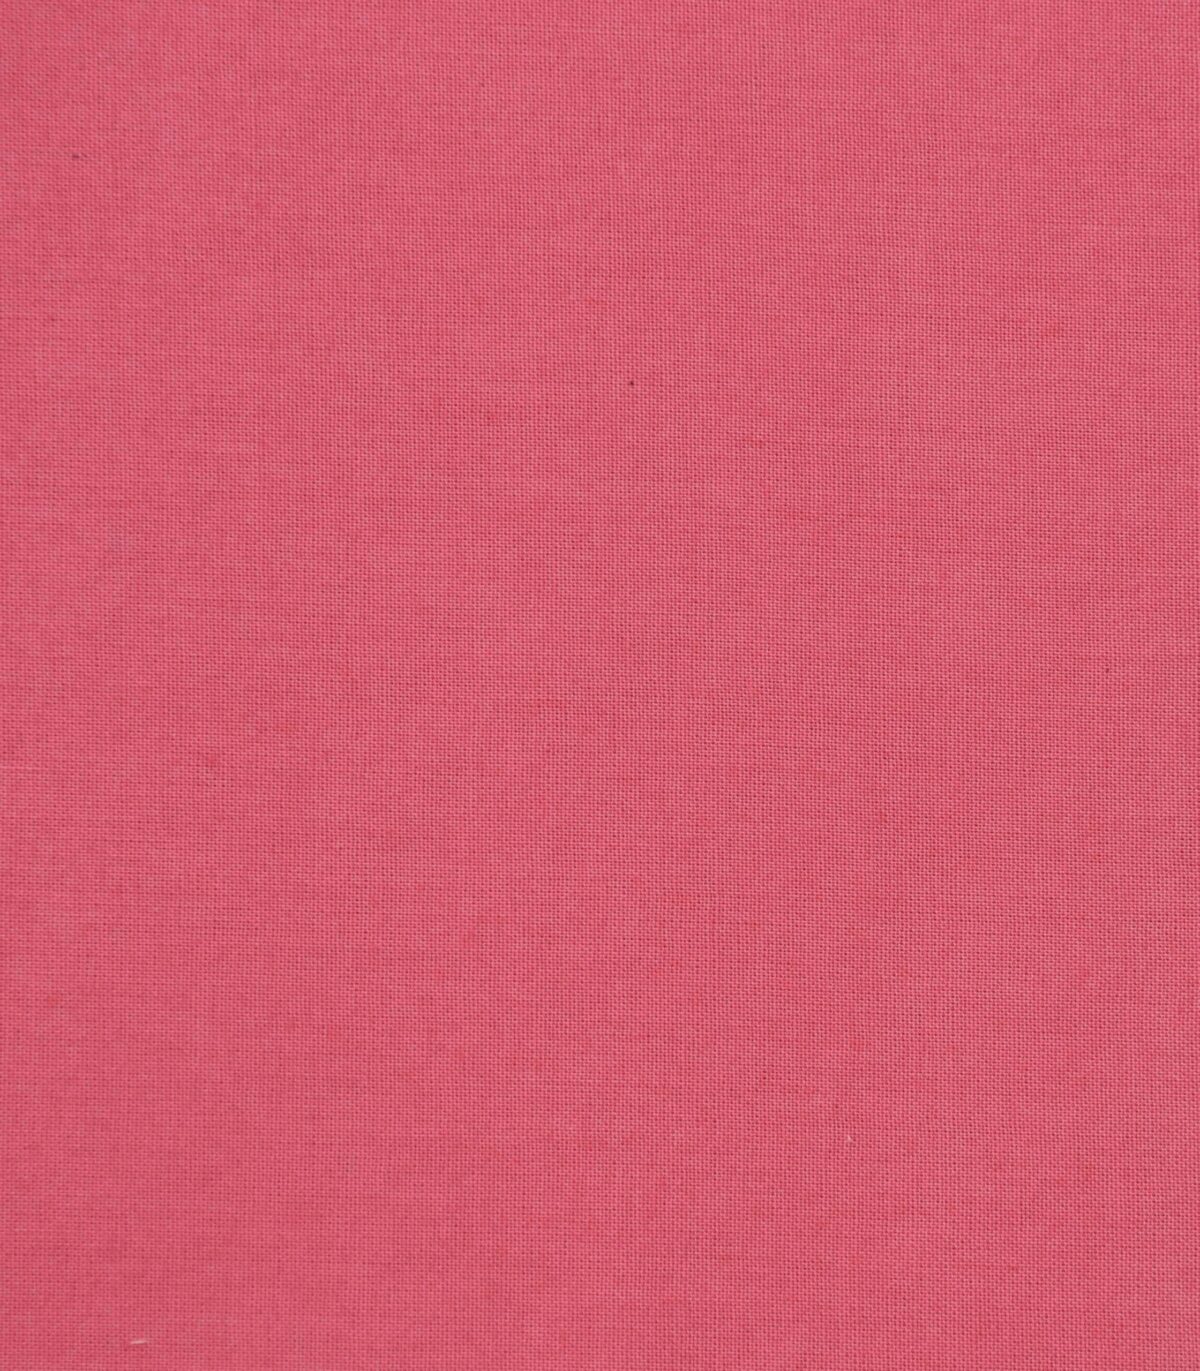 Pink Color Solid Cotton Fabric